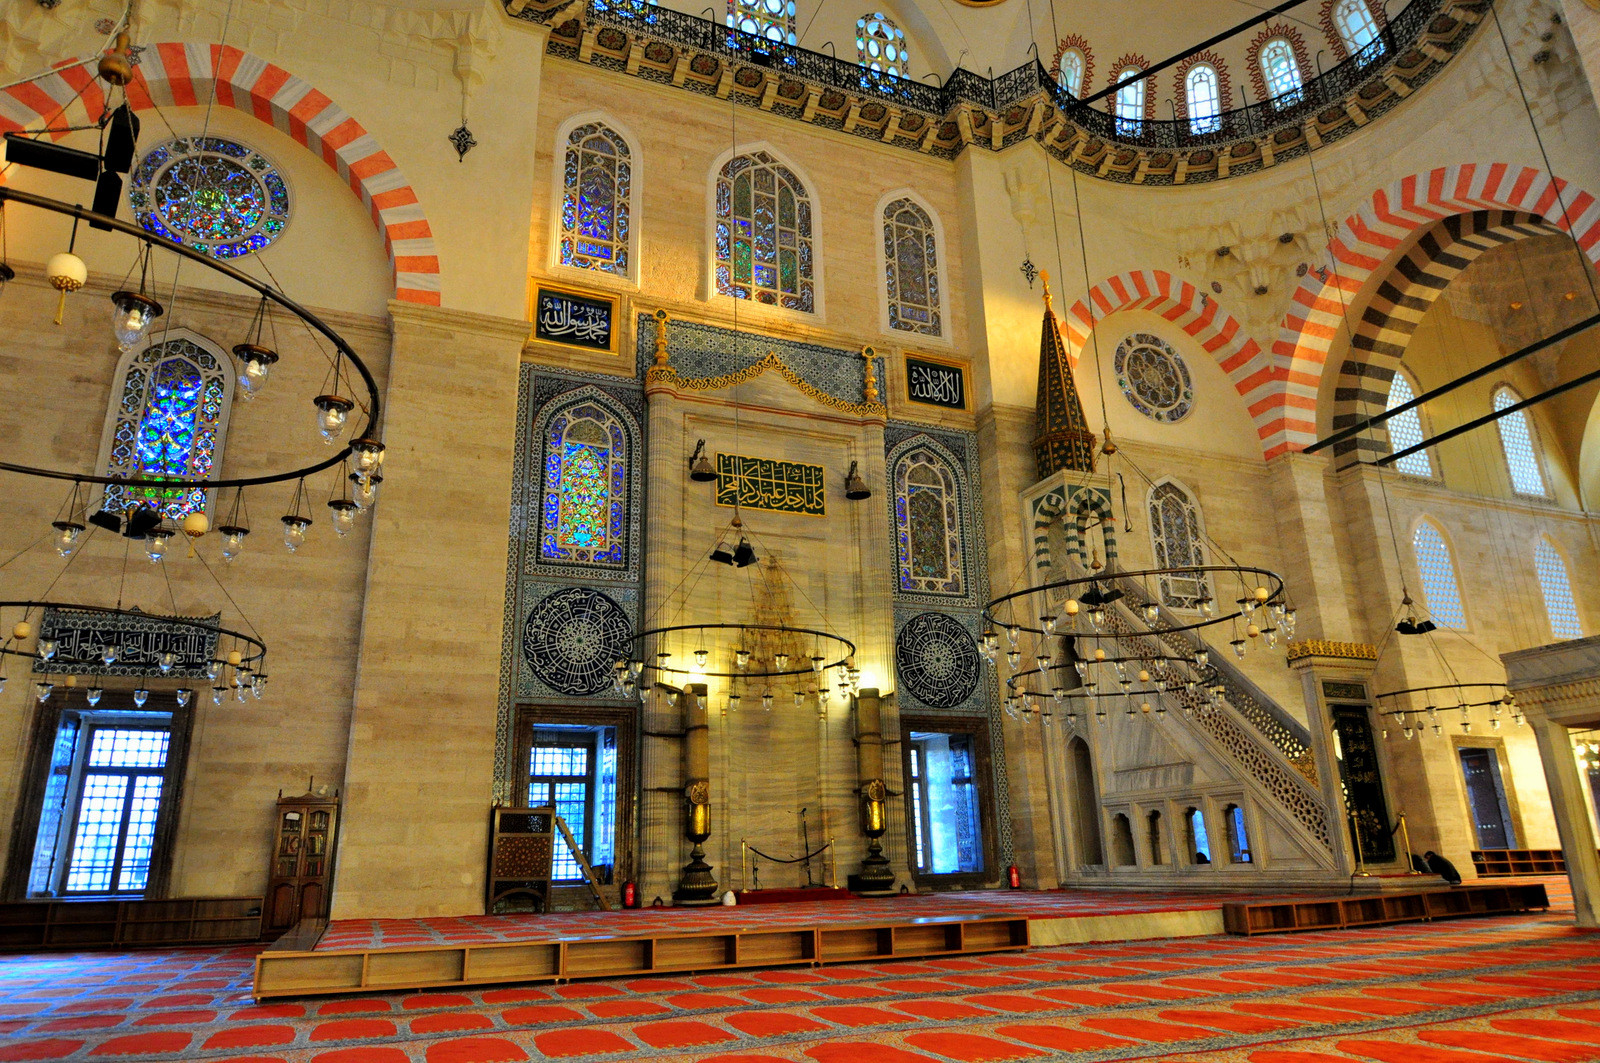 Istanbul Suleymaniye Mosque Facts, History, Photos - Istanbul Clues